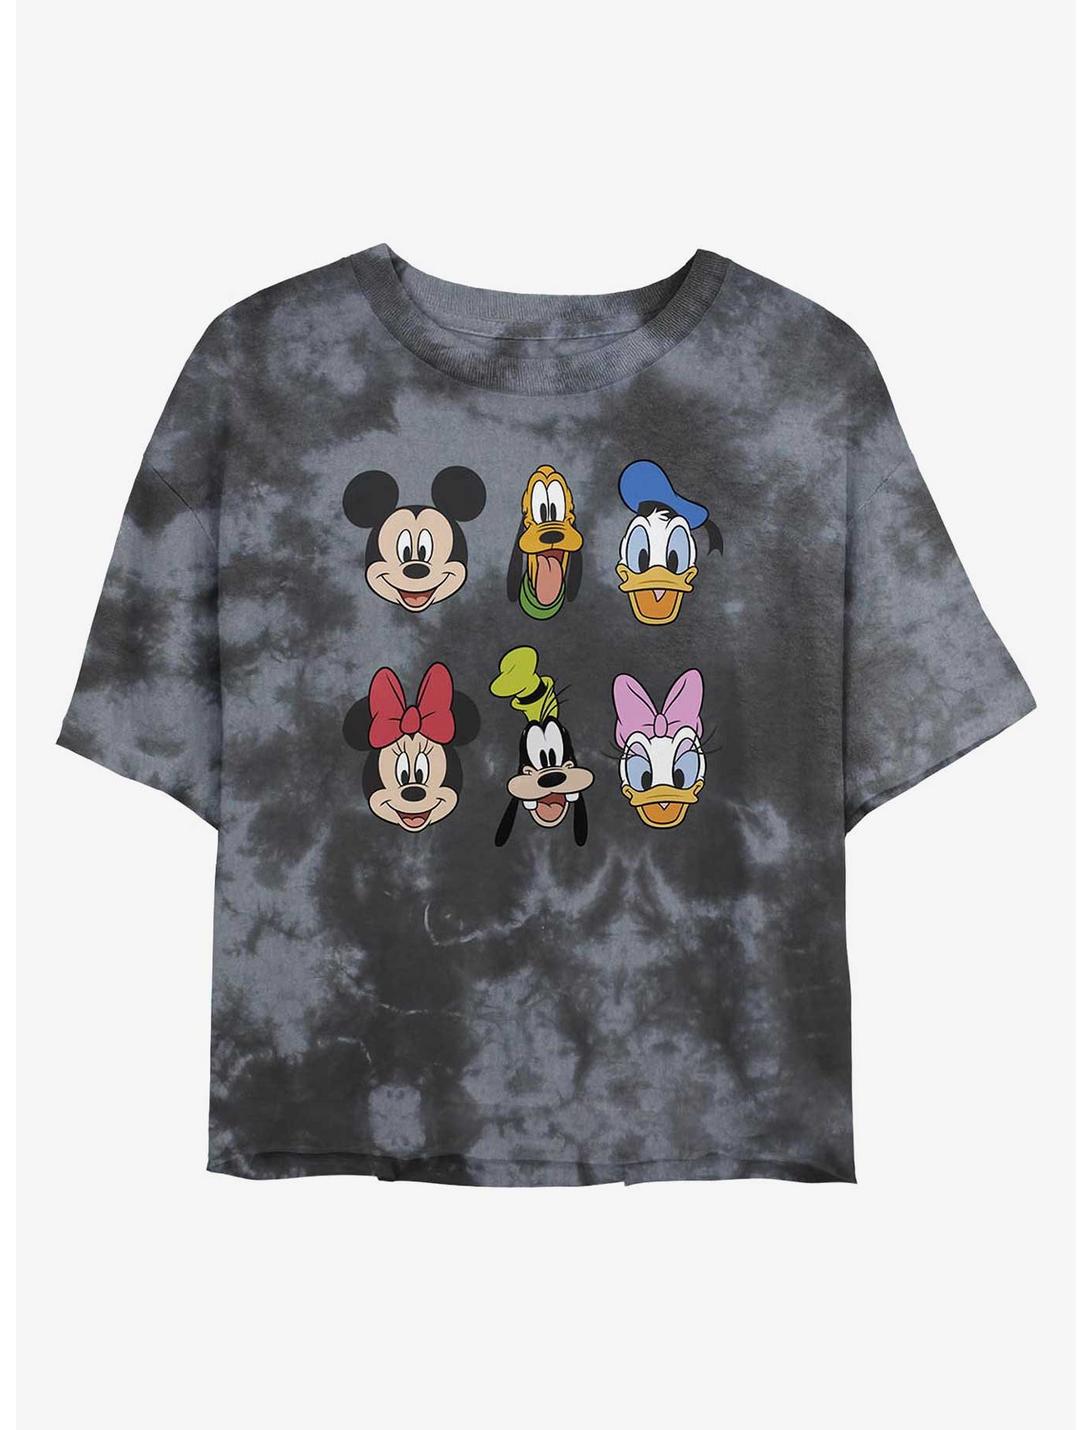 Disney Mickey Mouse And Friends Faces Womens Tie-Dye Crop T-Shirt, BLKCHAR, hi-res